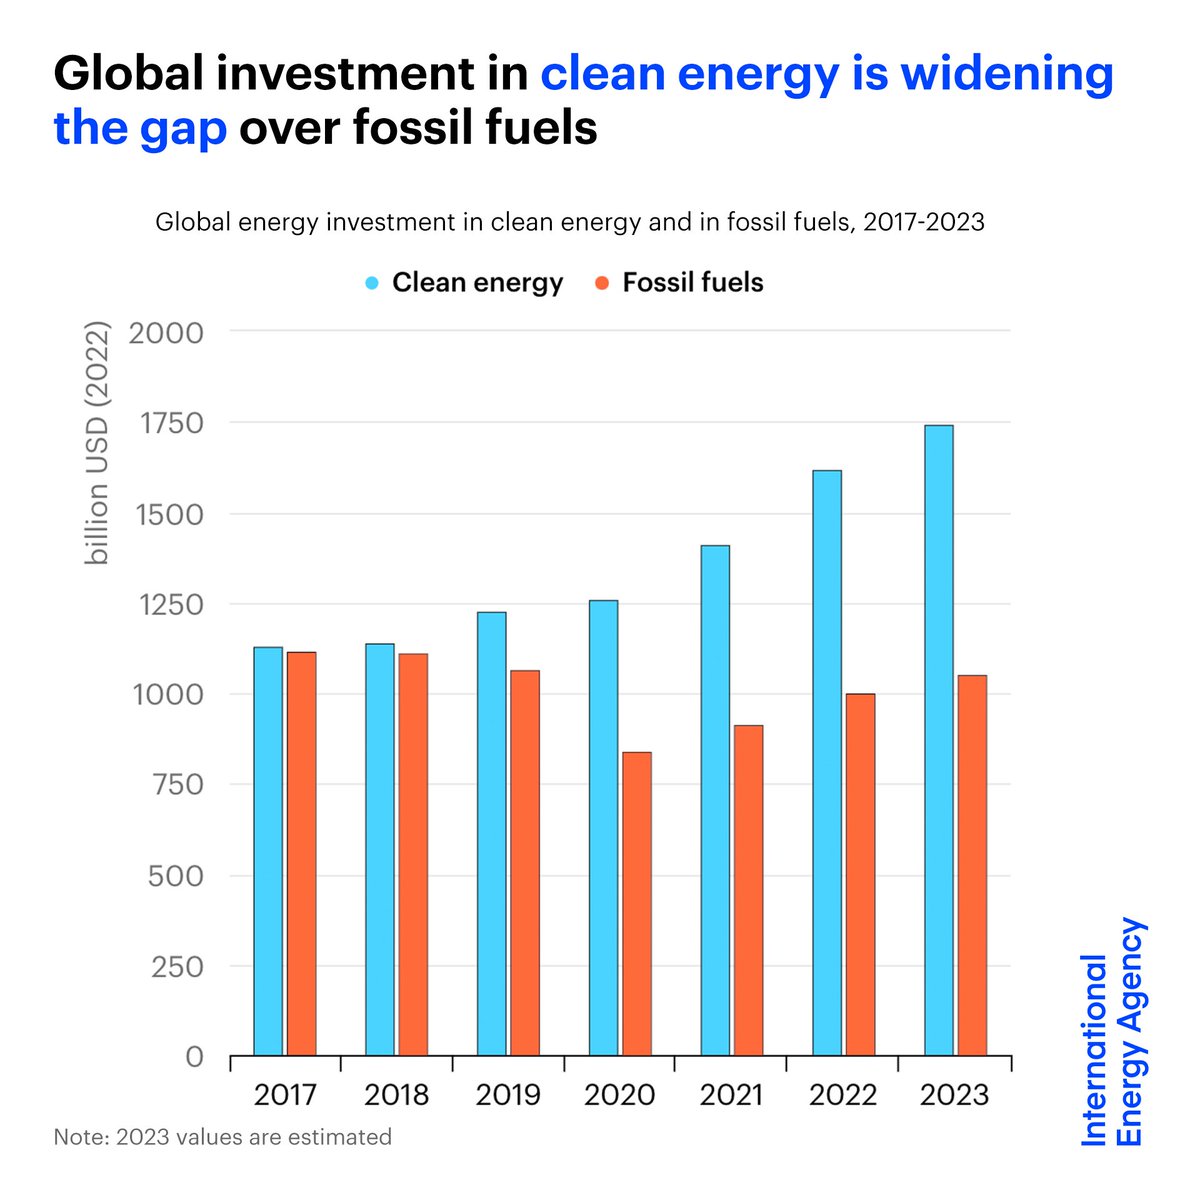 A major shift is taking place in global energy

5 years ago, for $1 invested in fossil fuels, the same went to clean energy. But since then, a big gap has opened up.

This year, for $1 invested in fossil fuels, $1.70 is going to clean energy ➡️ iea.li/3BQOlMq